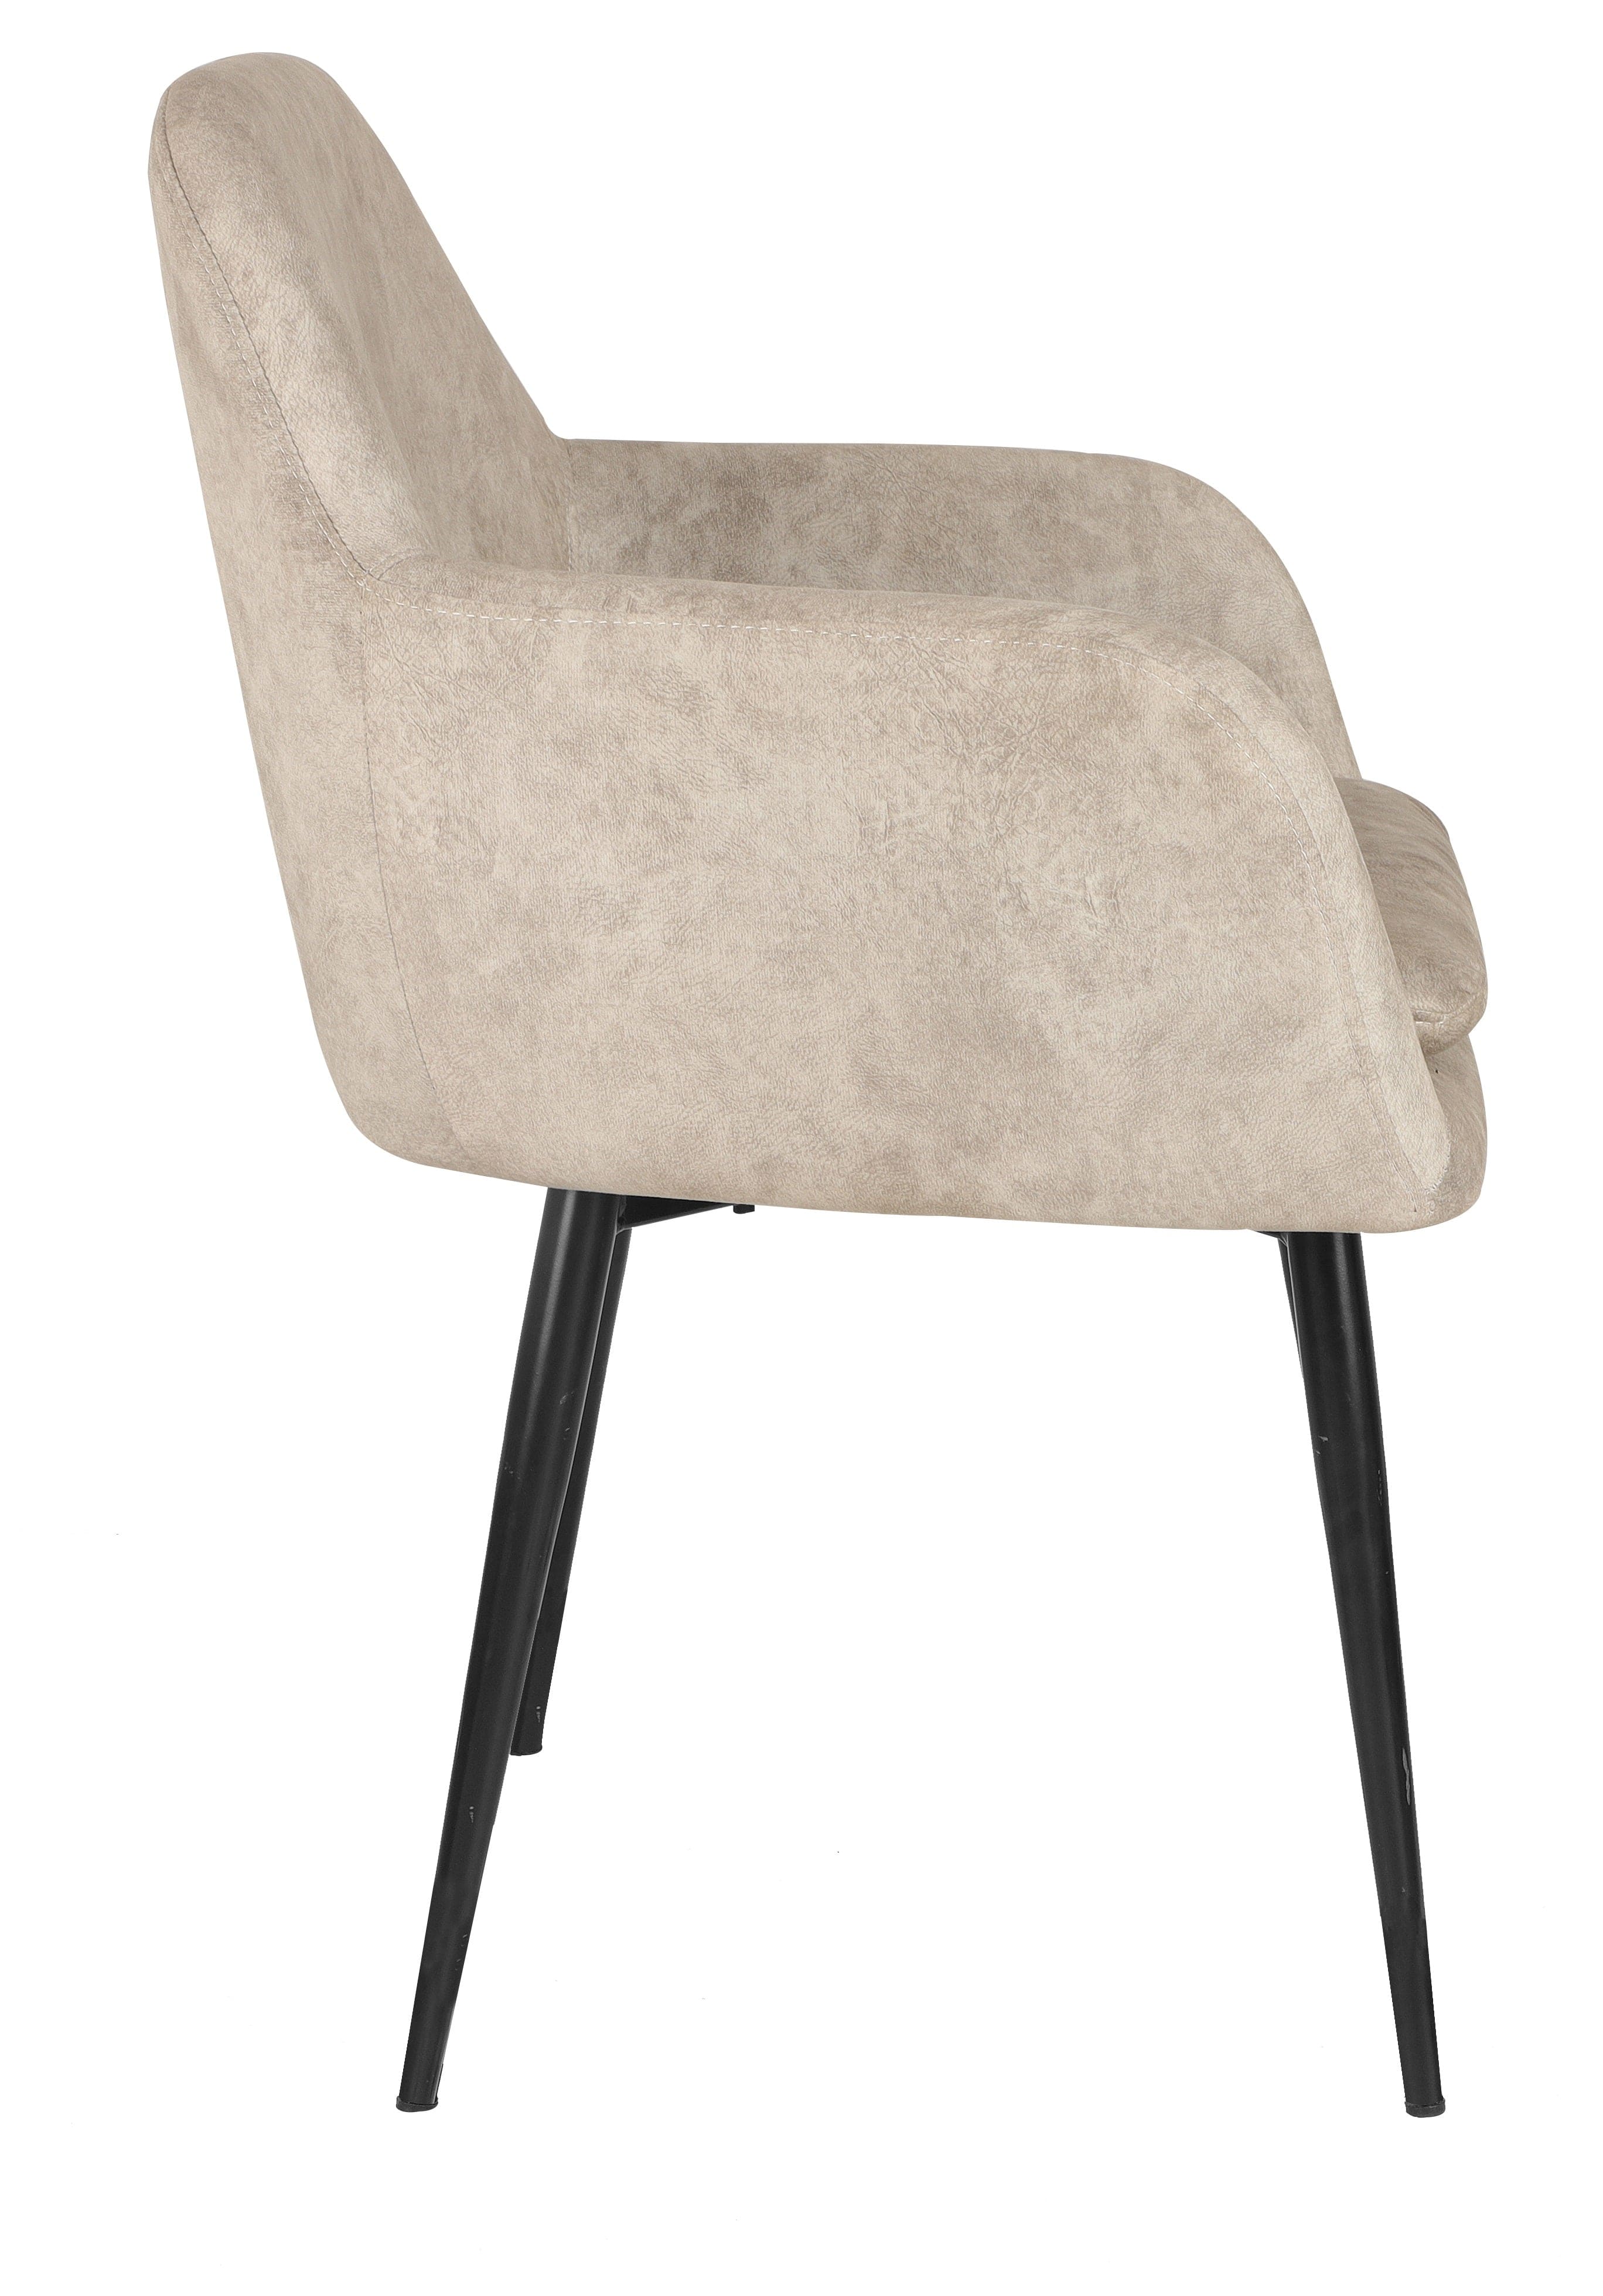 Adiko Lounge Chair Stool in Cream Color